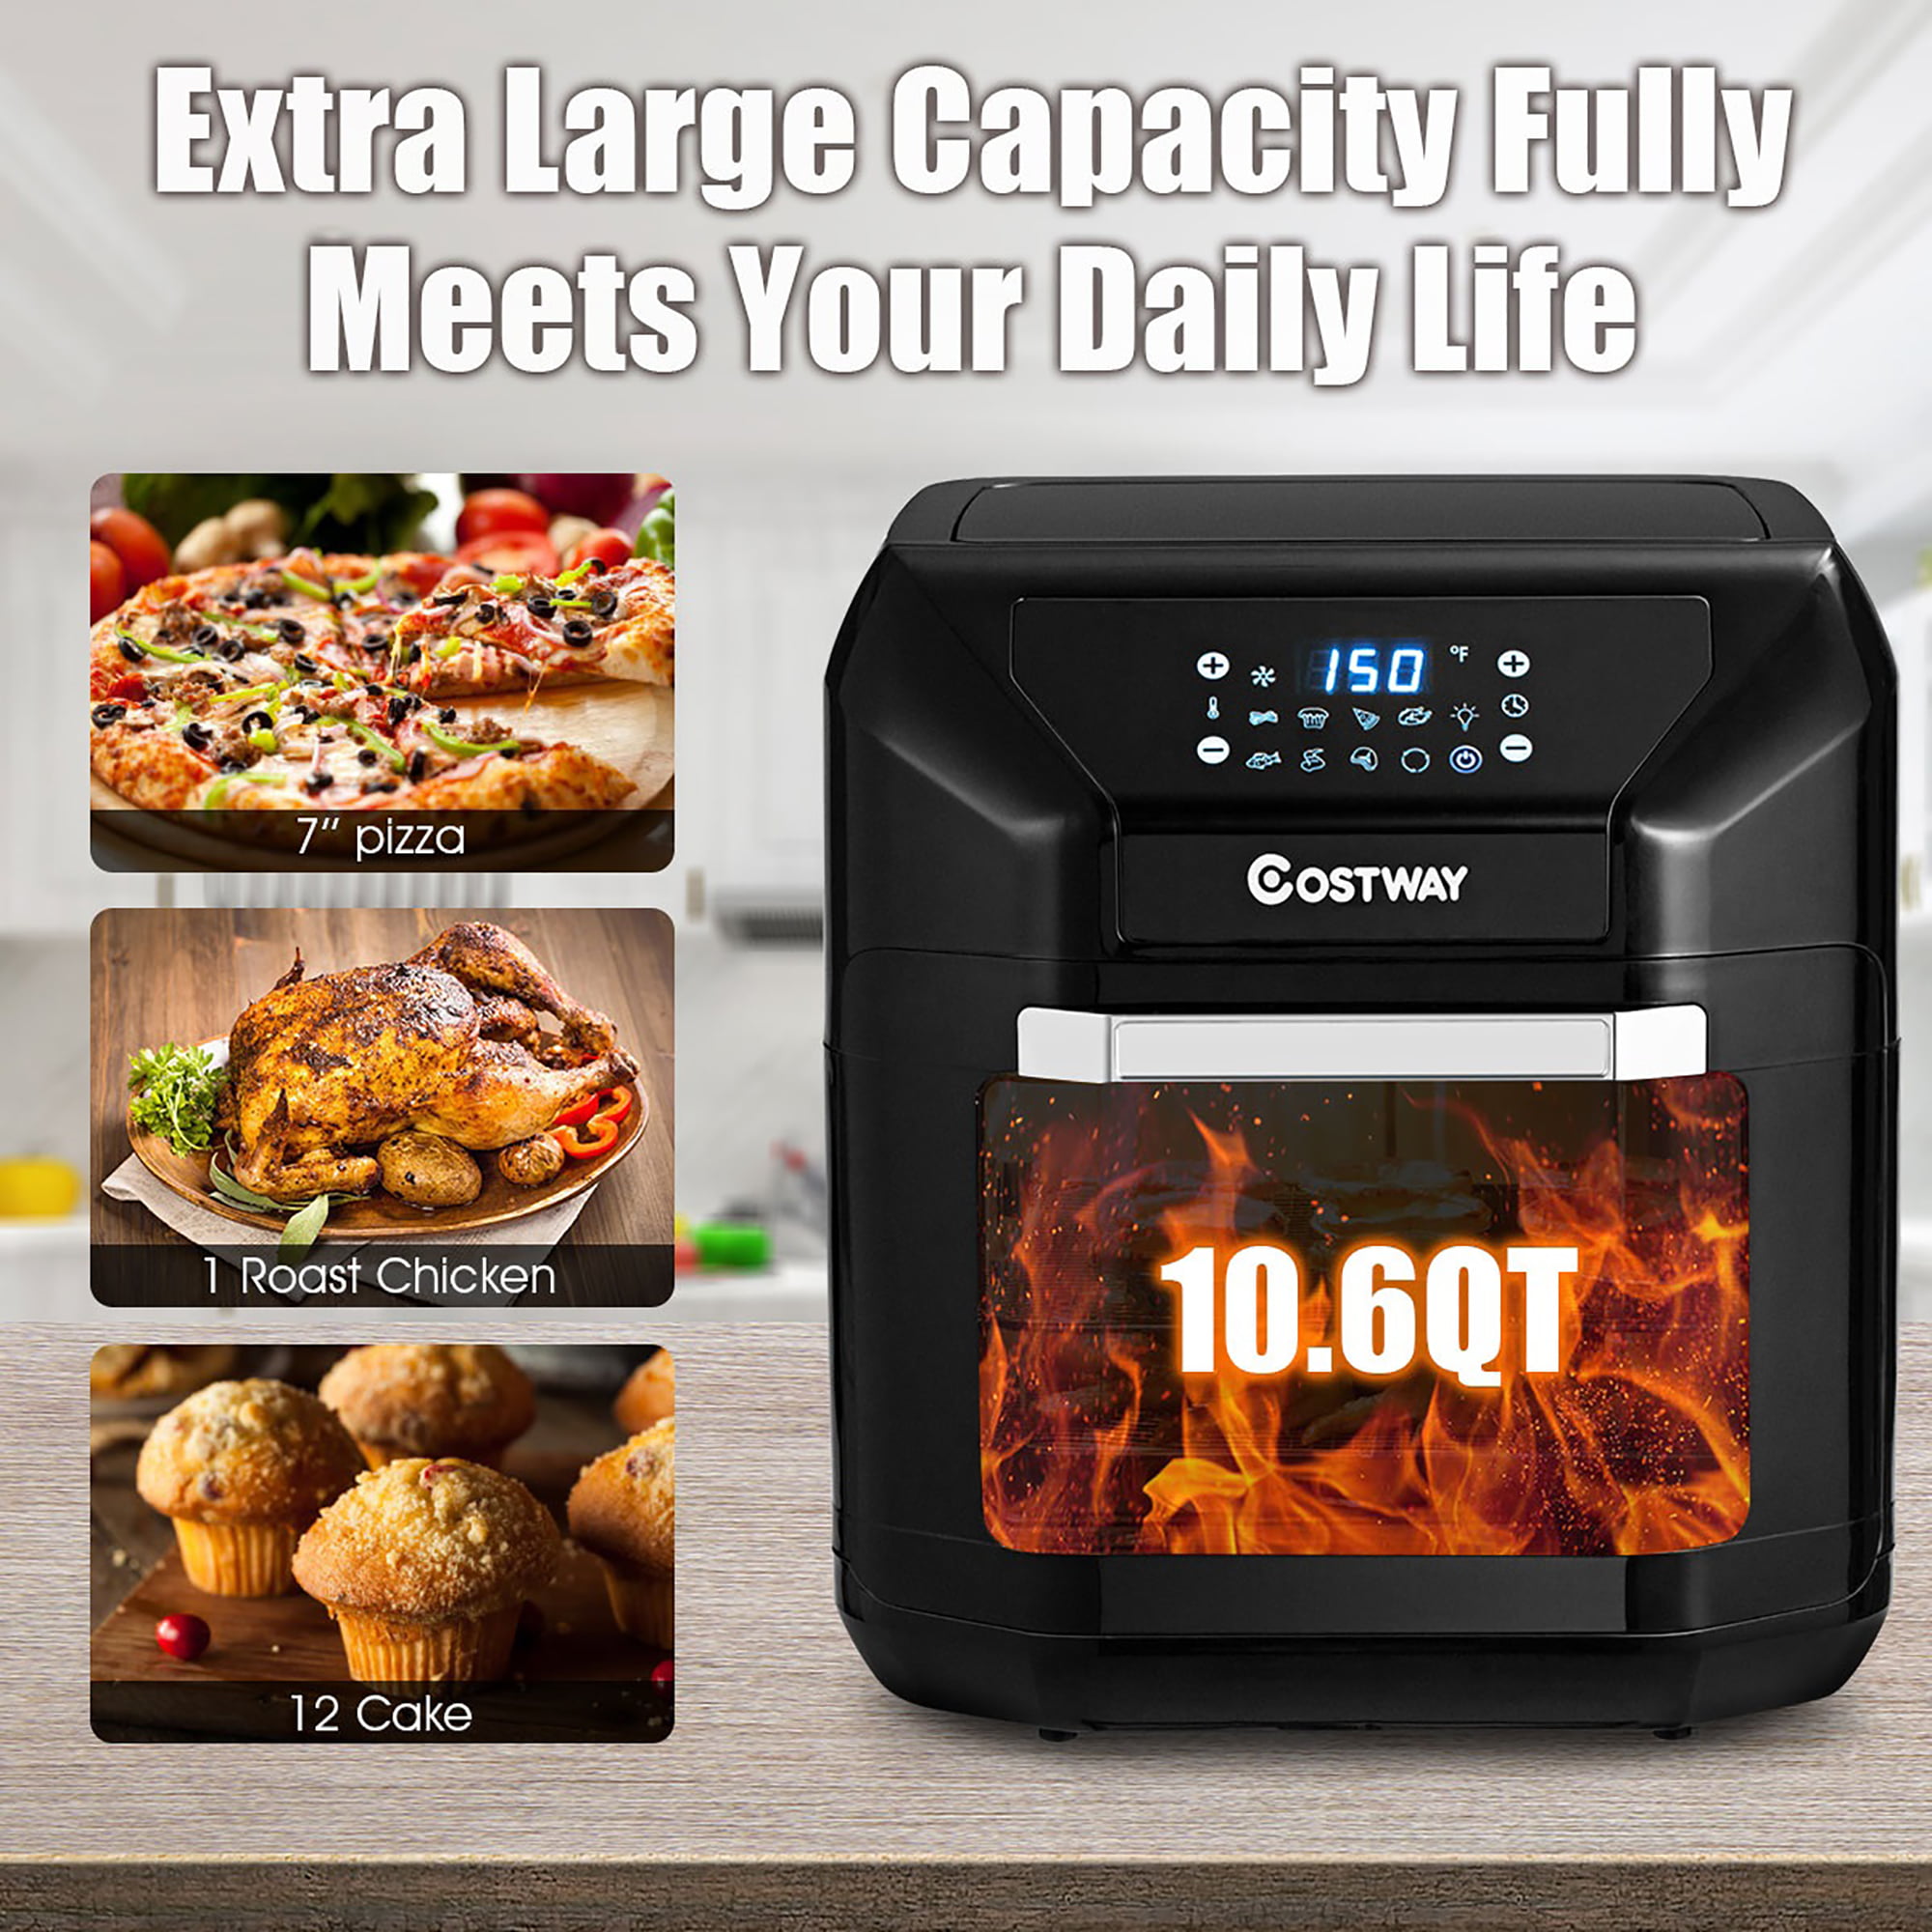 Costway 1500W Electric Air Fryer Cooker with Rapid Air Circulation System  20917463 –